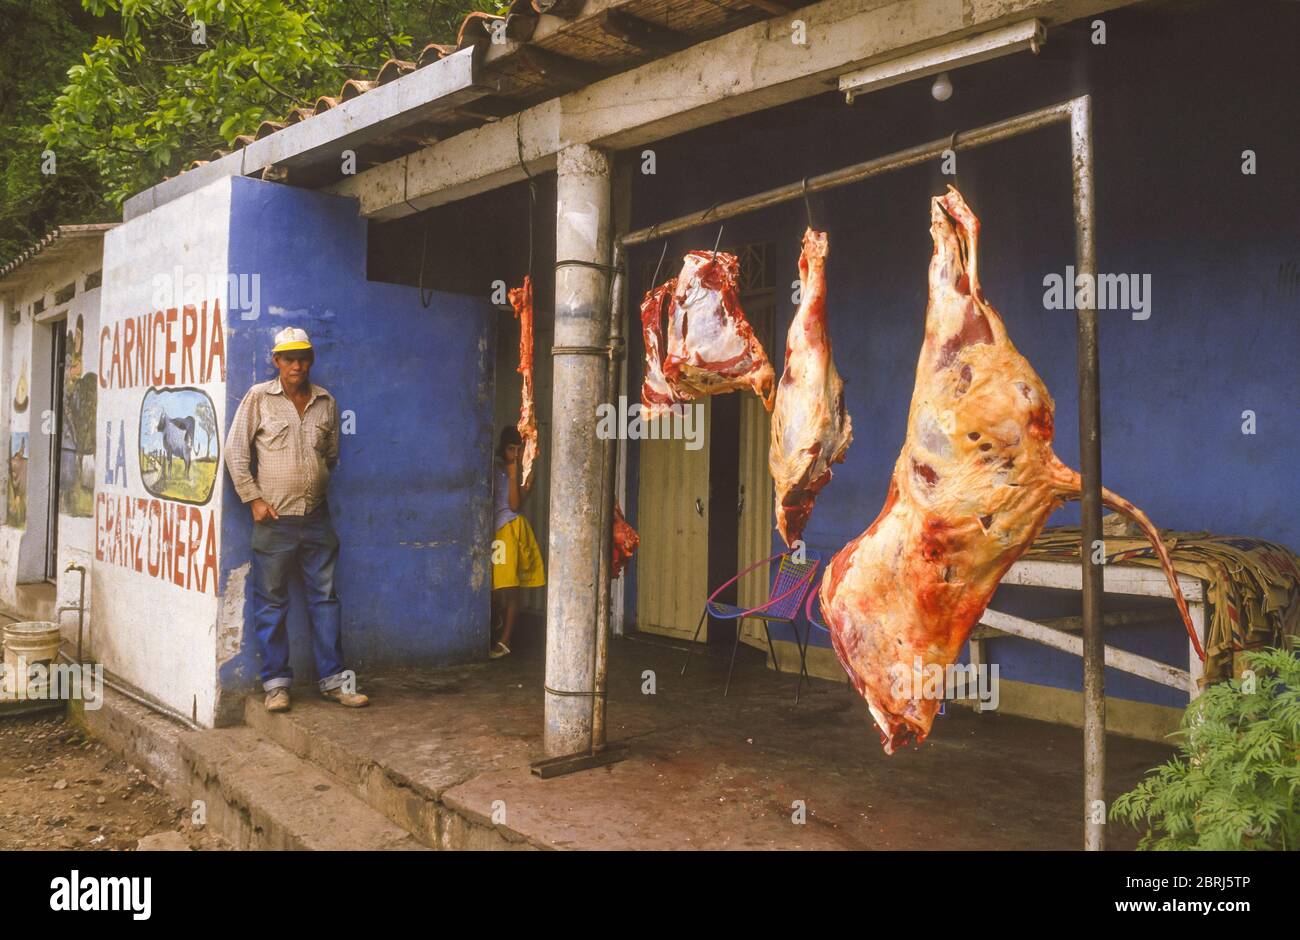 SAN CRISTOBAL, TACHIRA STATE, VENEZUELA - rural butcher shop with meat on display in May 1988. Stock Photo